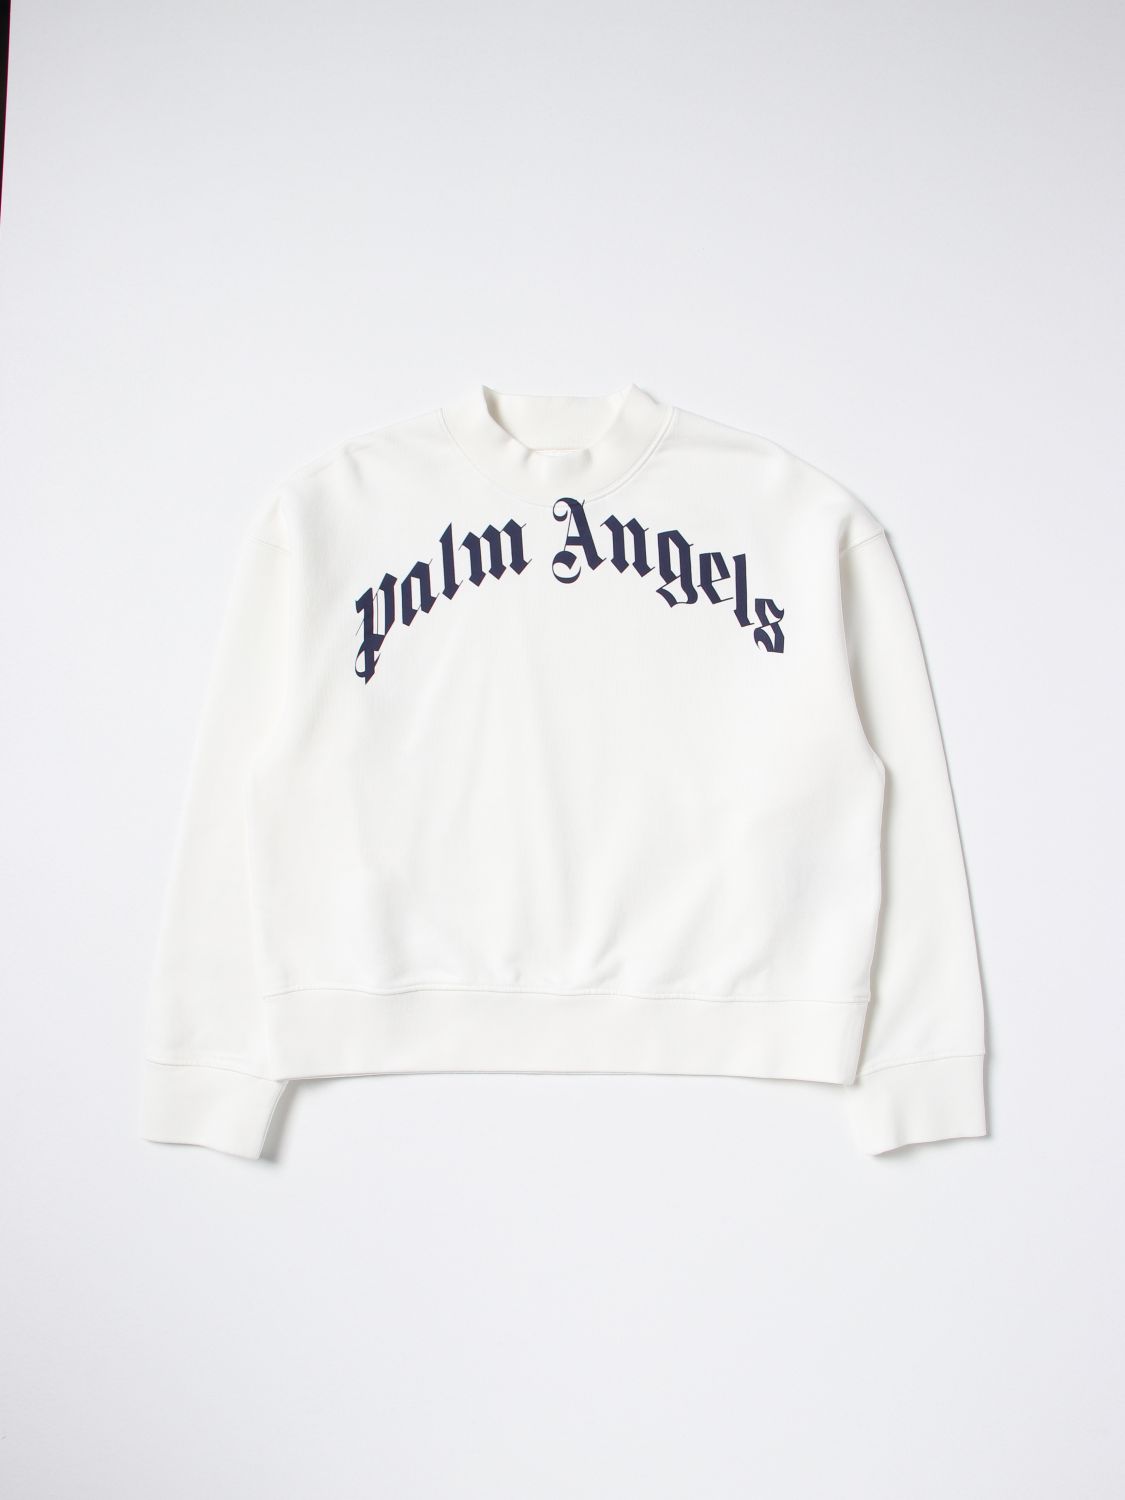 Palm Angels Sweater  Kids Color White